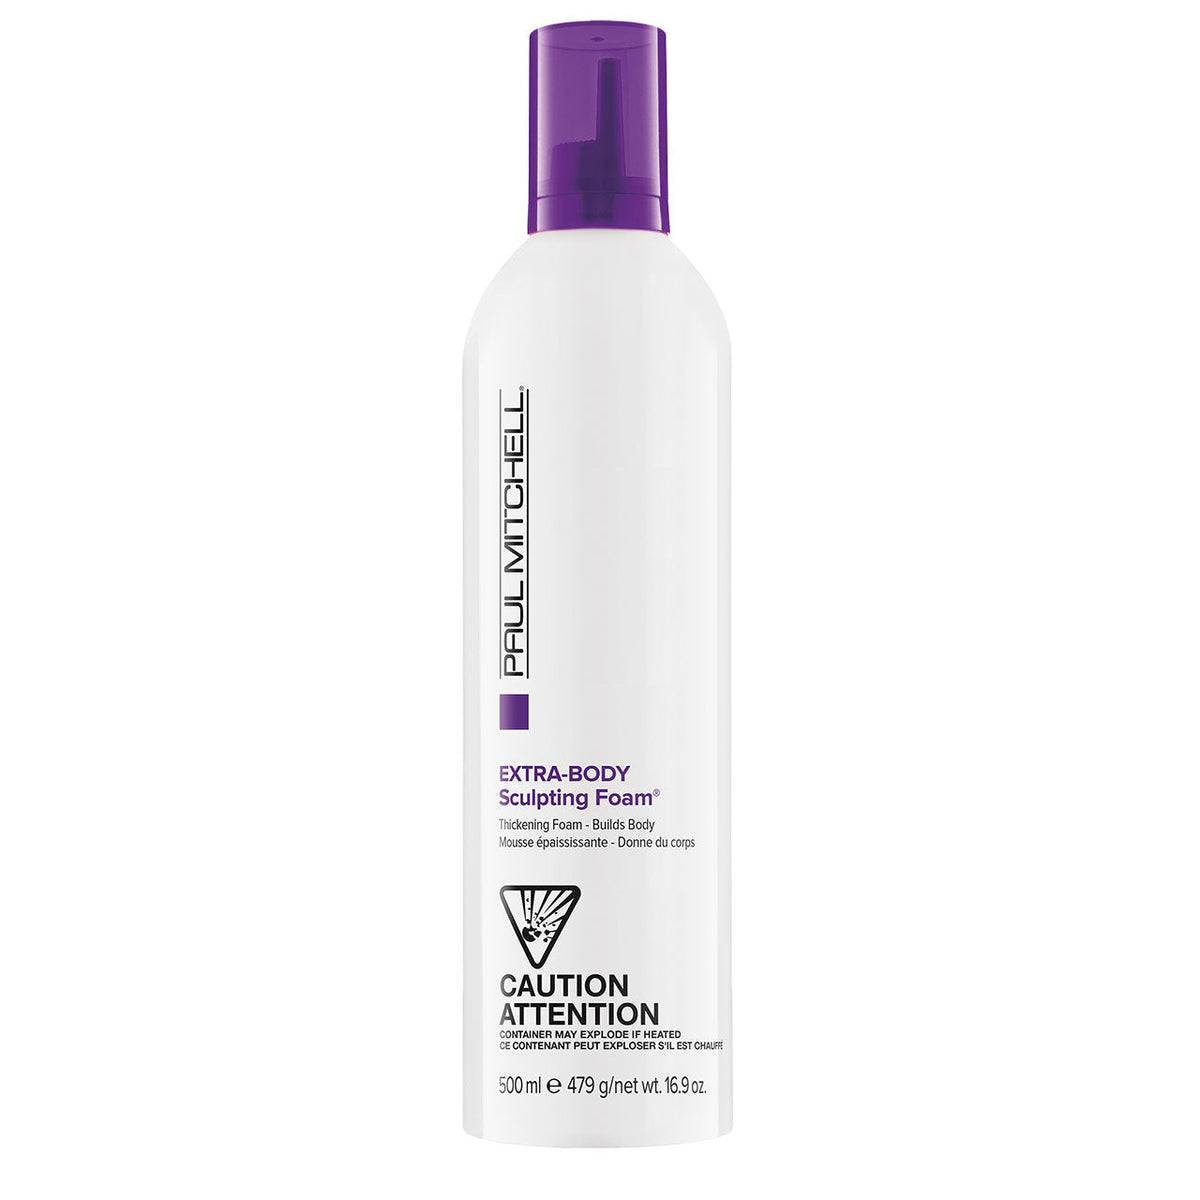 Extra-Body Sculpting Foam - 479g - by Paul Mitchell |ProCare Outlet|